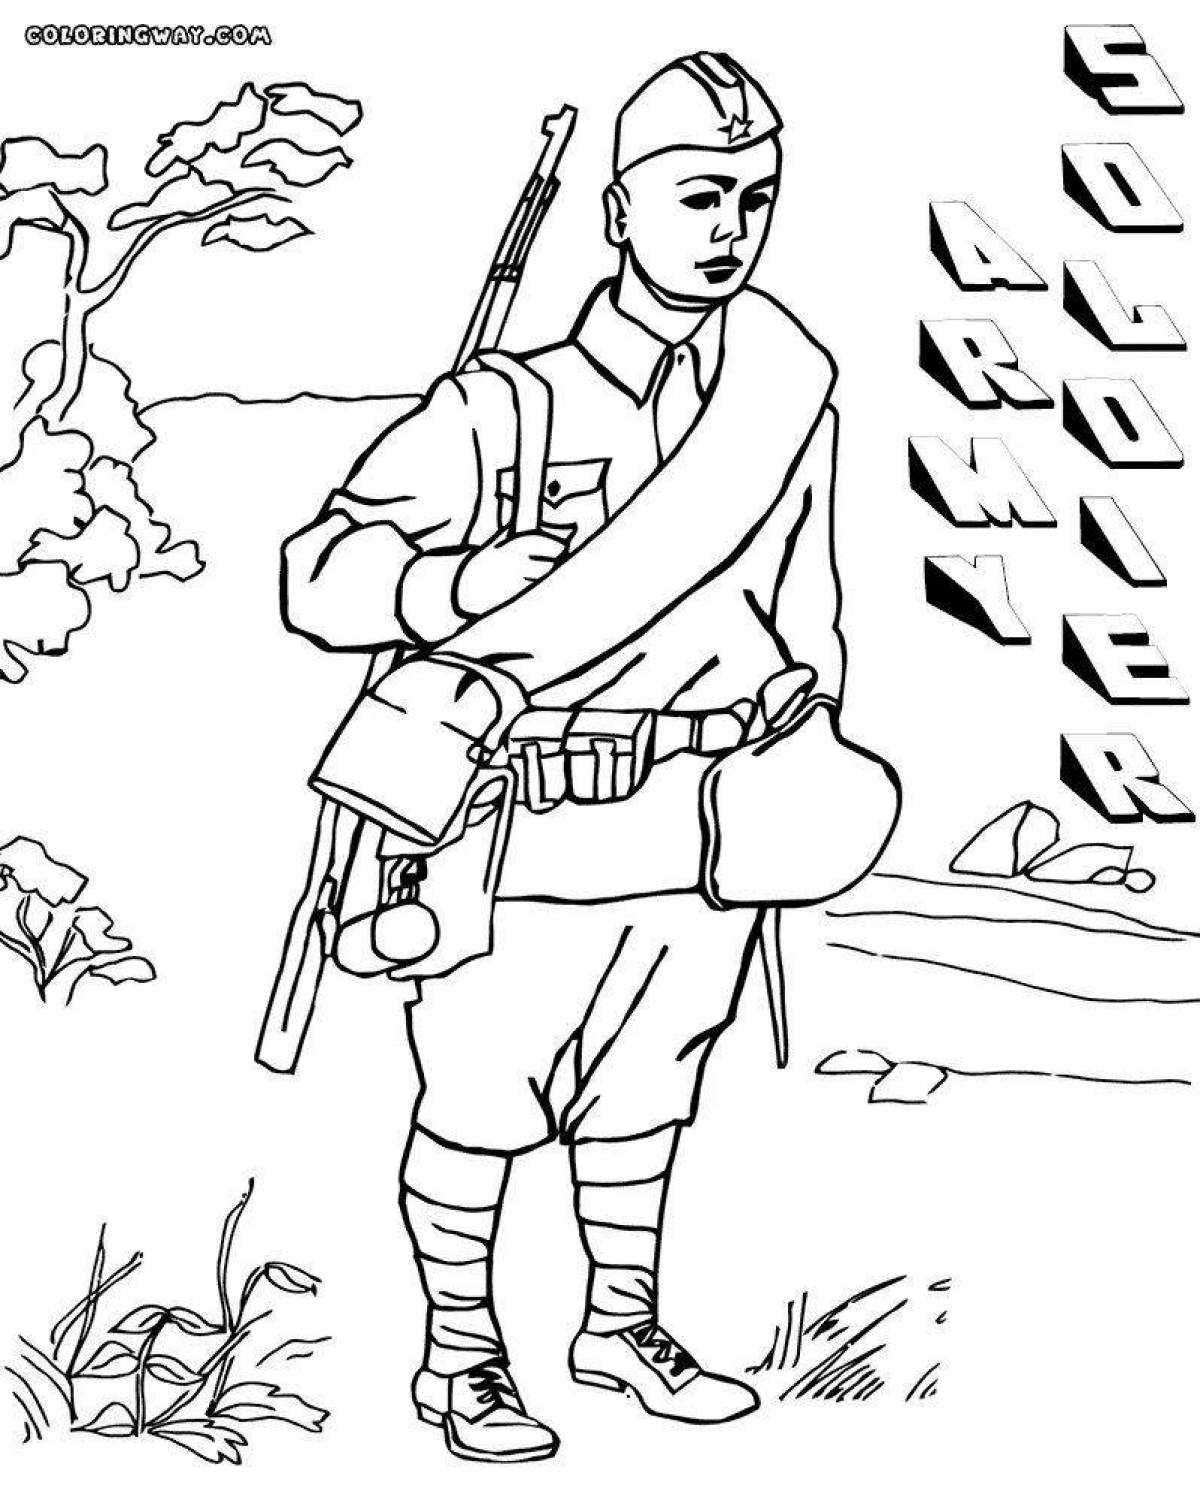 Grand wow coloring pages for kids